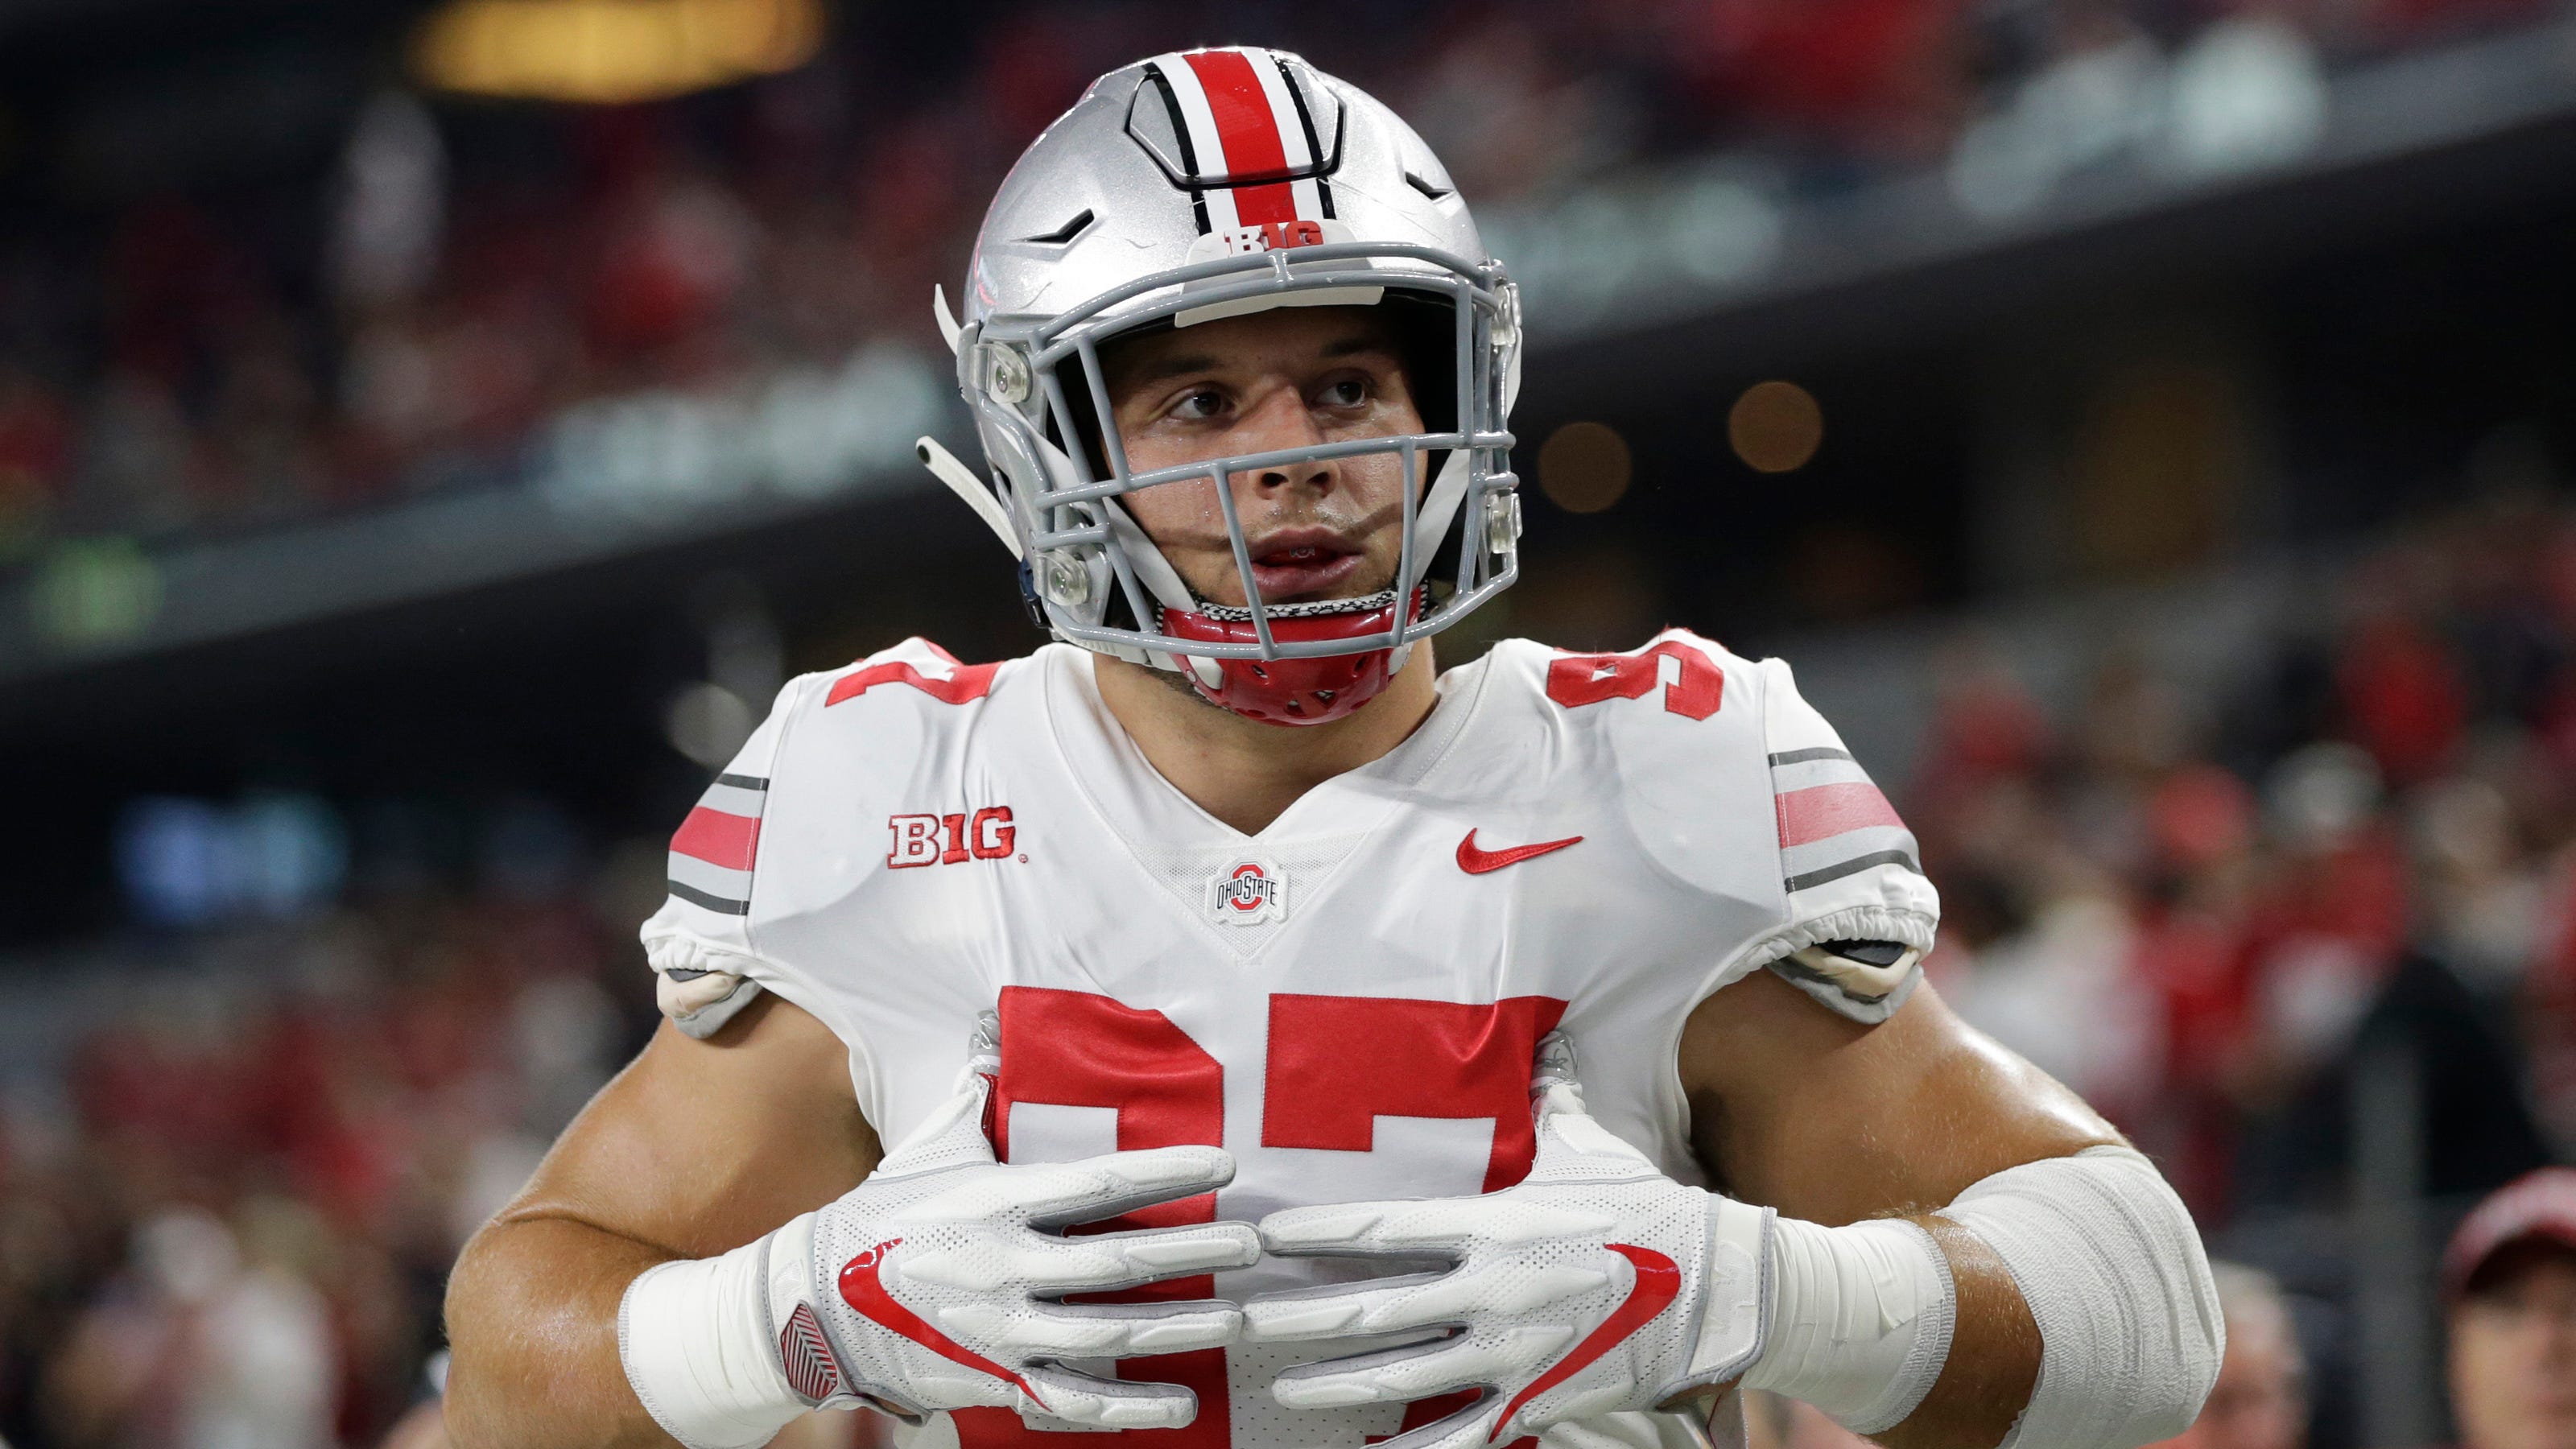 One of the darkest moments': How potential No. 1 NFL pick Nick Bosa go...